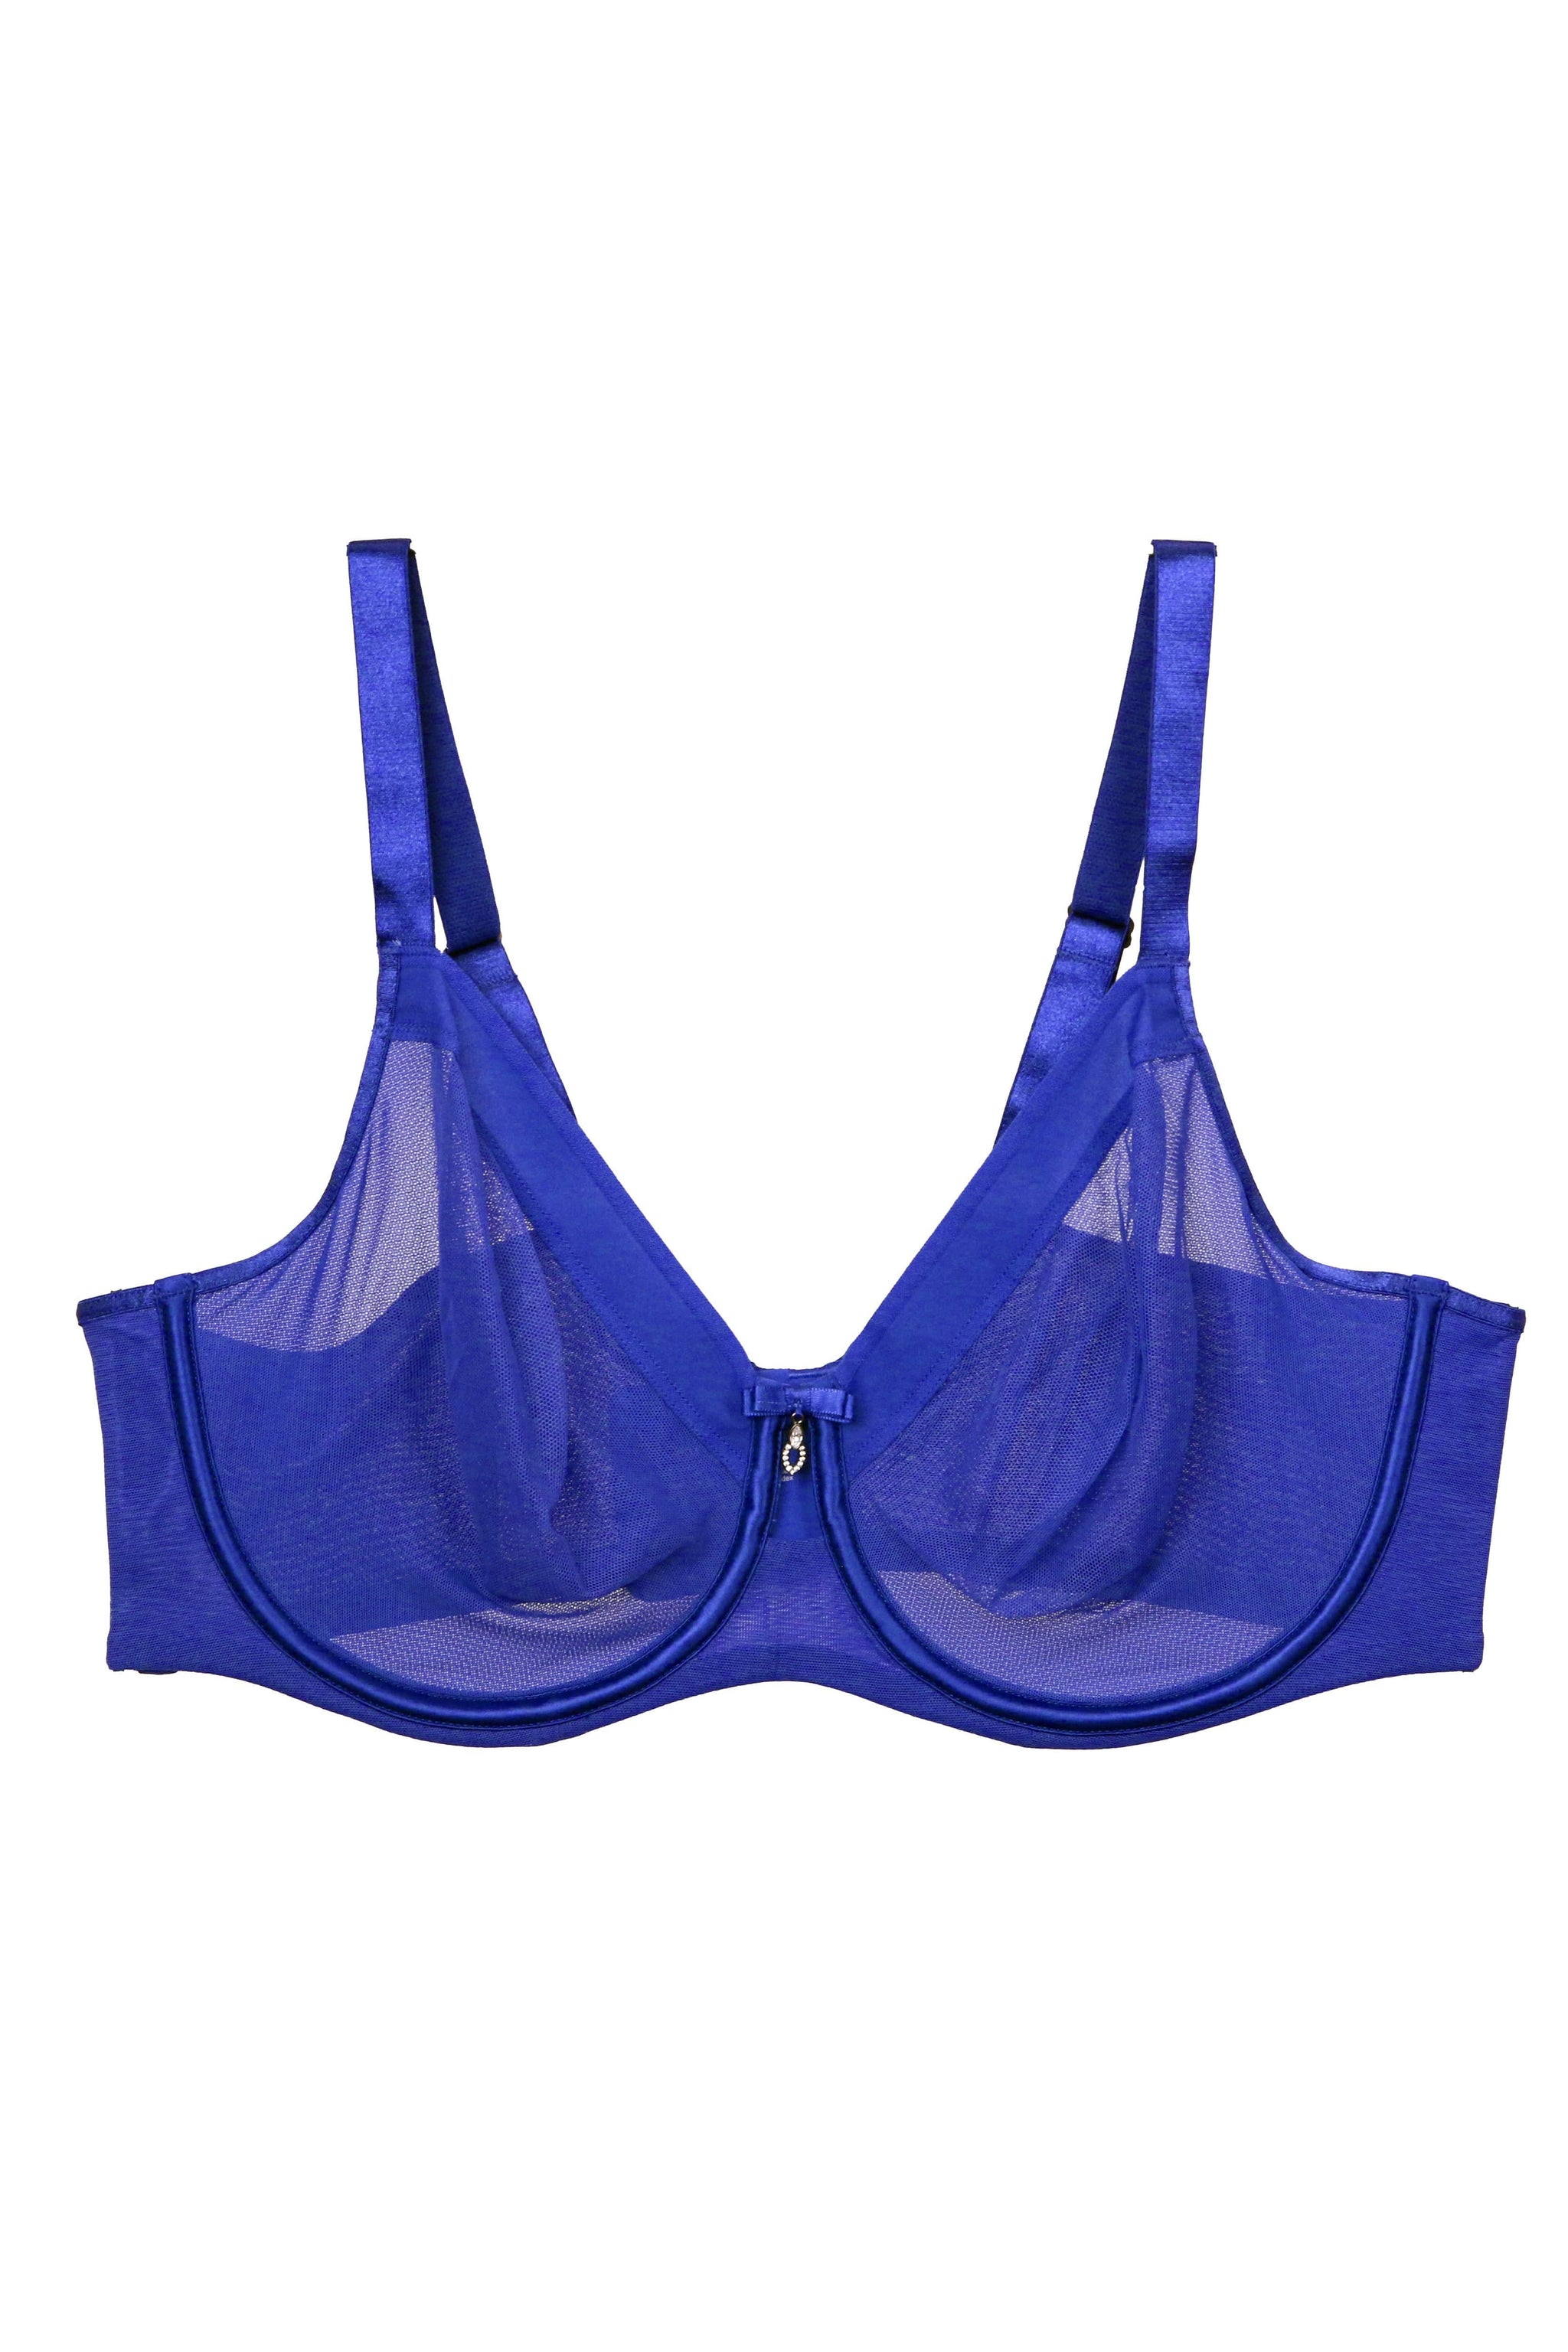 Jennifer Romantic Sheer Floral Lace See Through Underwire Bra (32DD) Royal  Blue at  Women's Clothing store